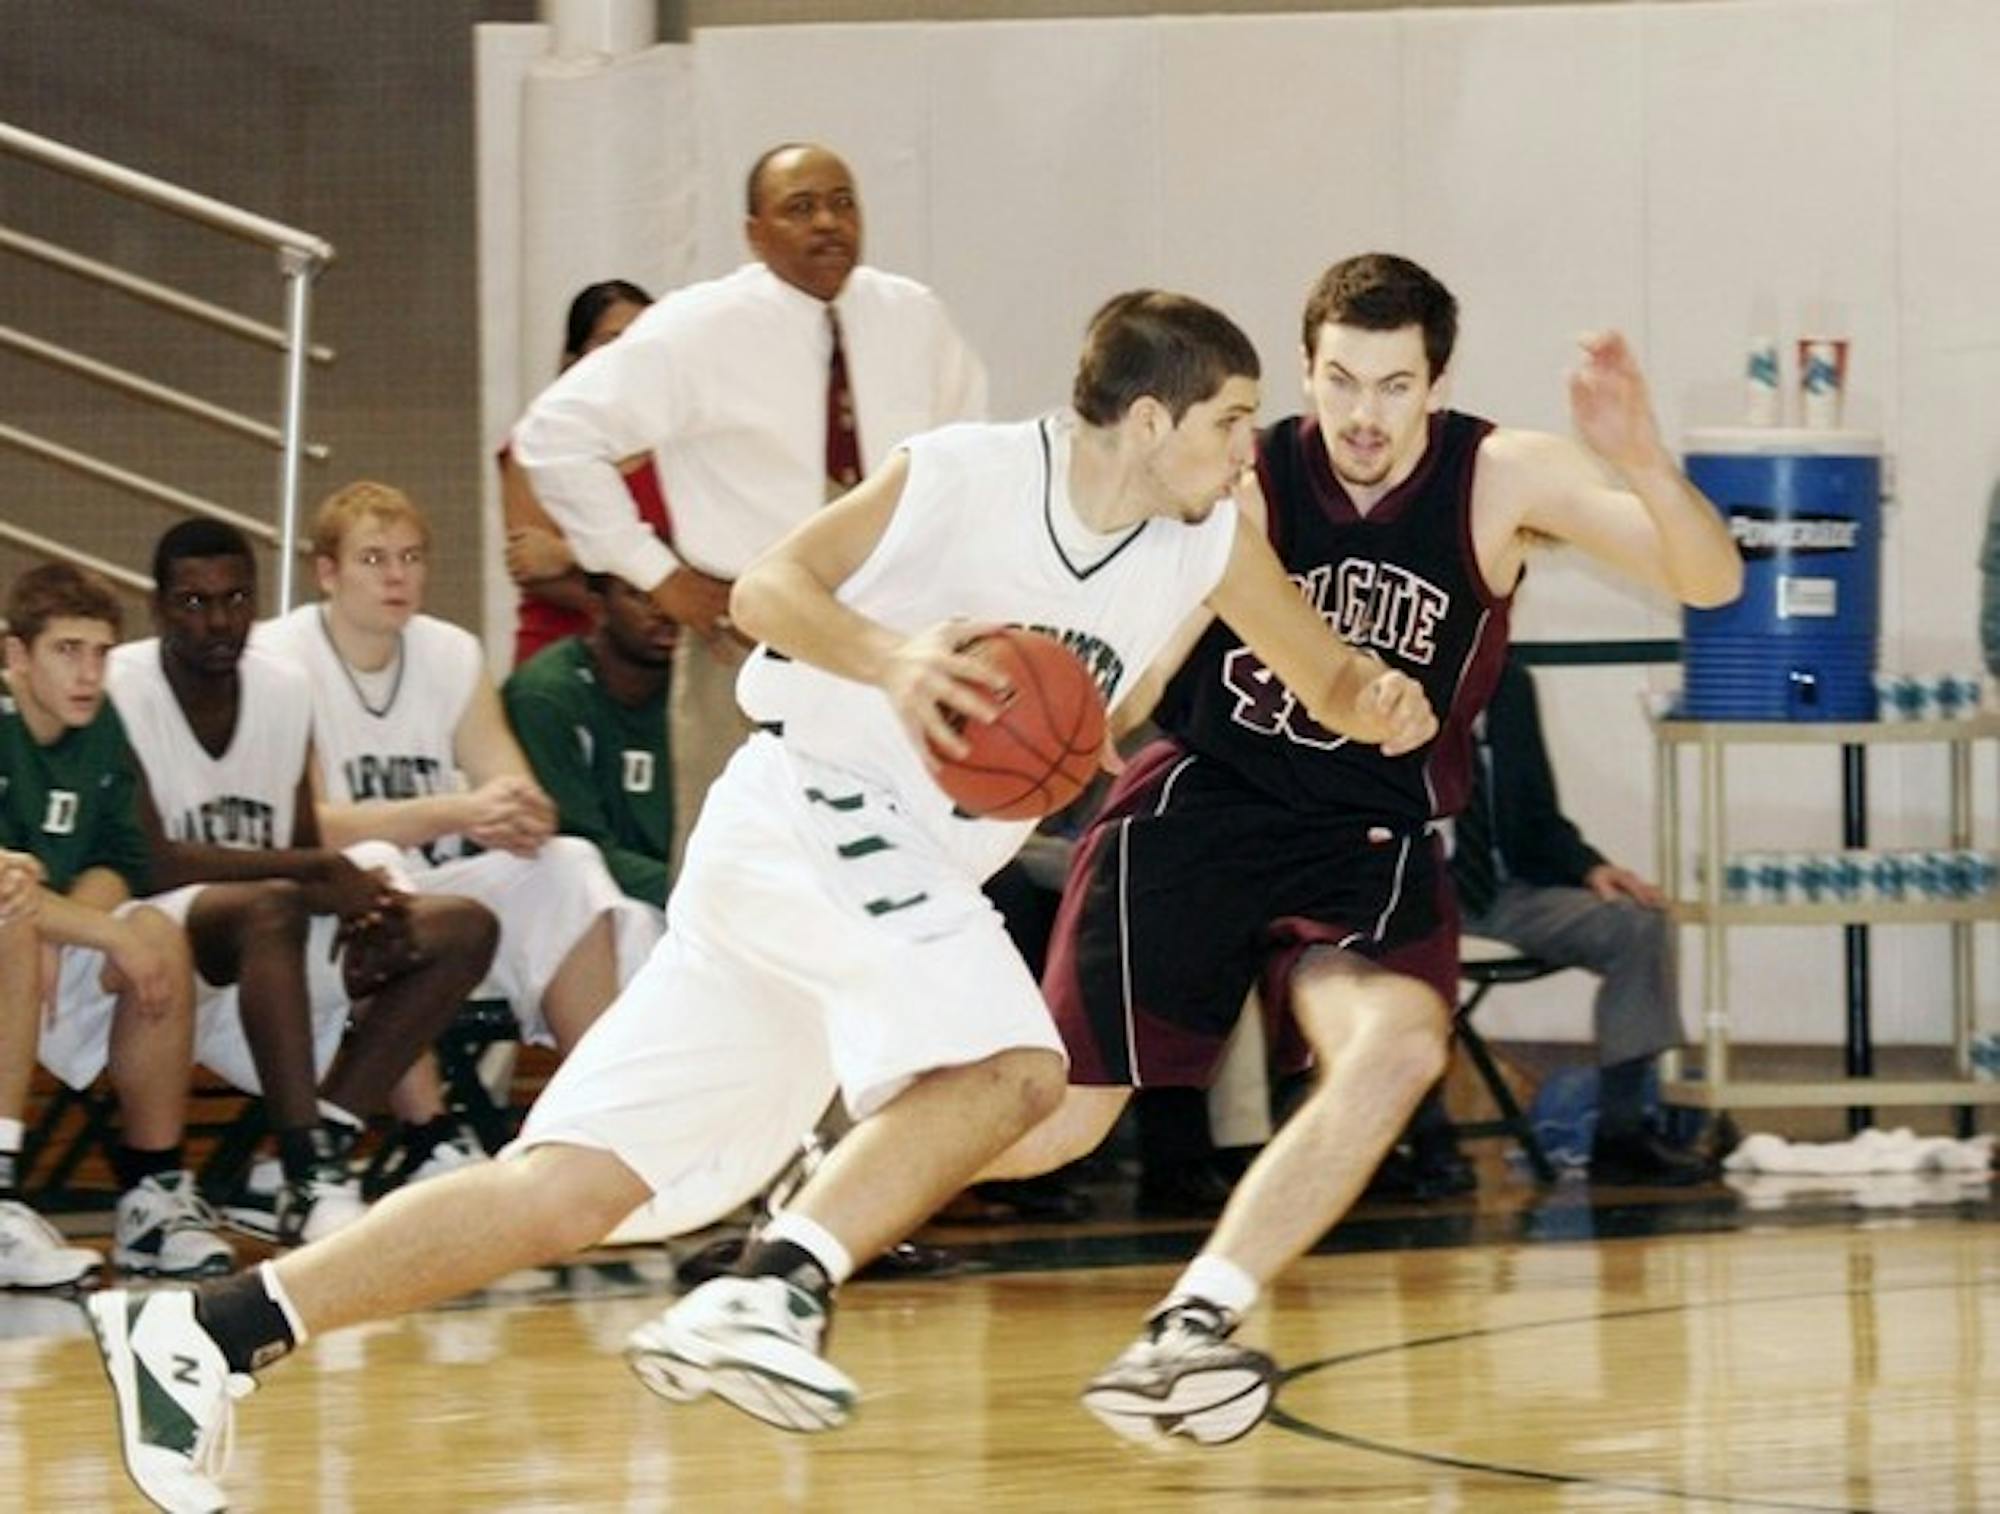 Dan Biber '09 scored four points and pulled down three rebounds in Dartmouth's 55-43 loss to Colgate Saturday.